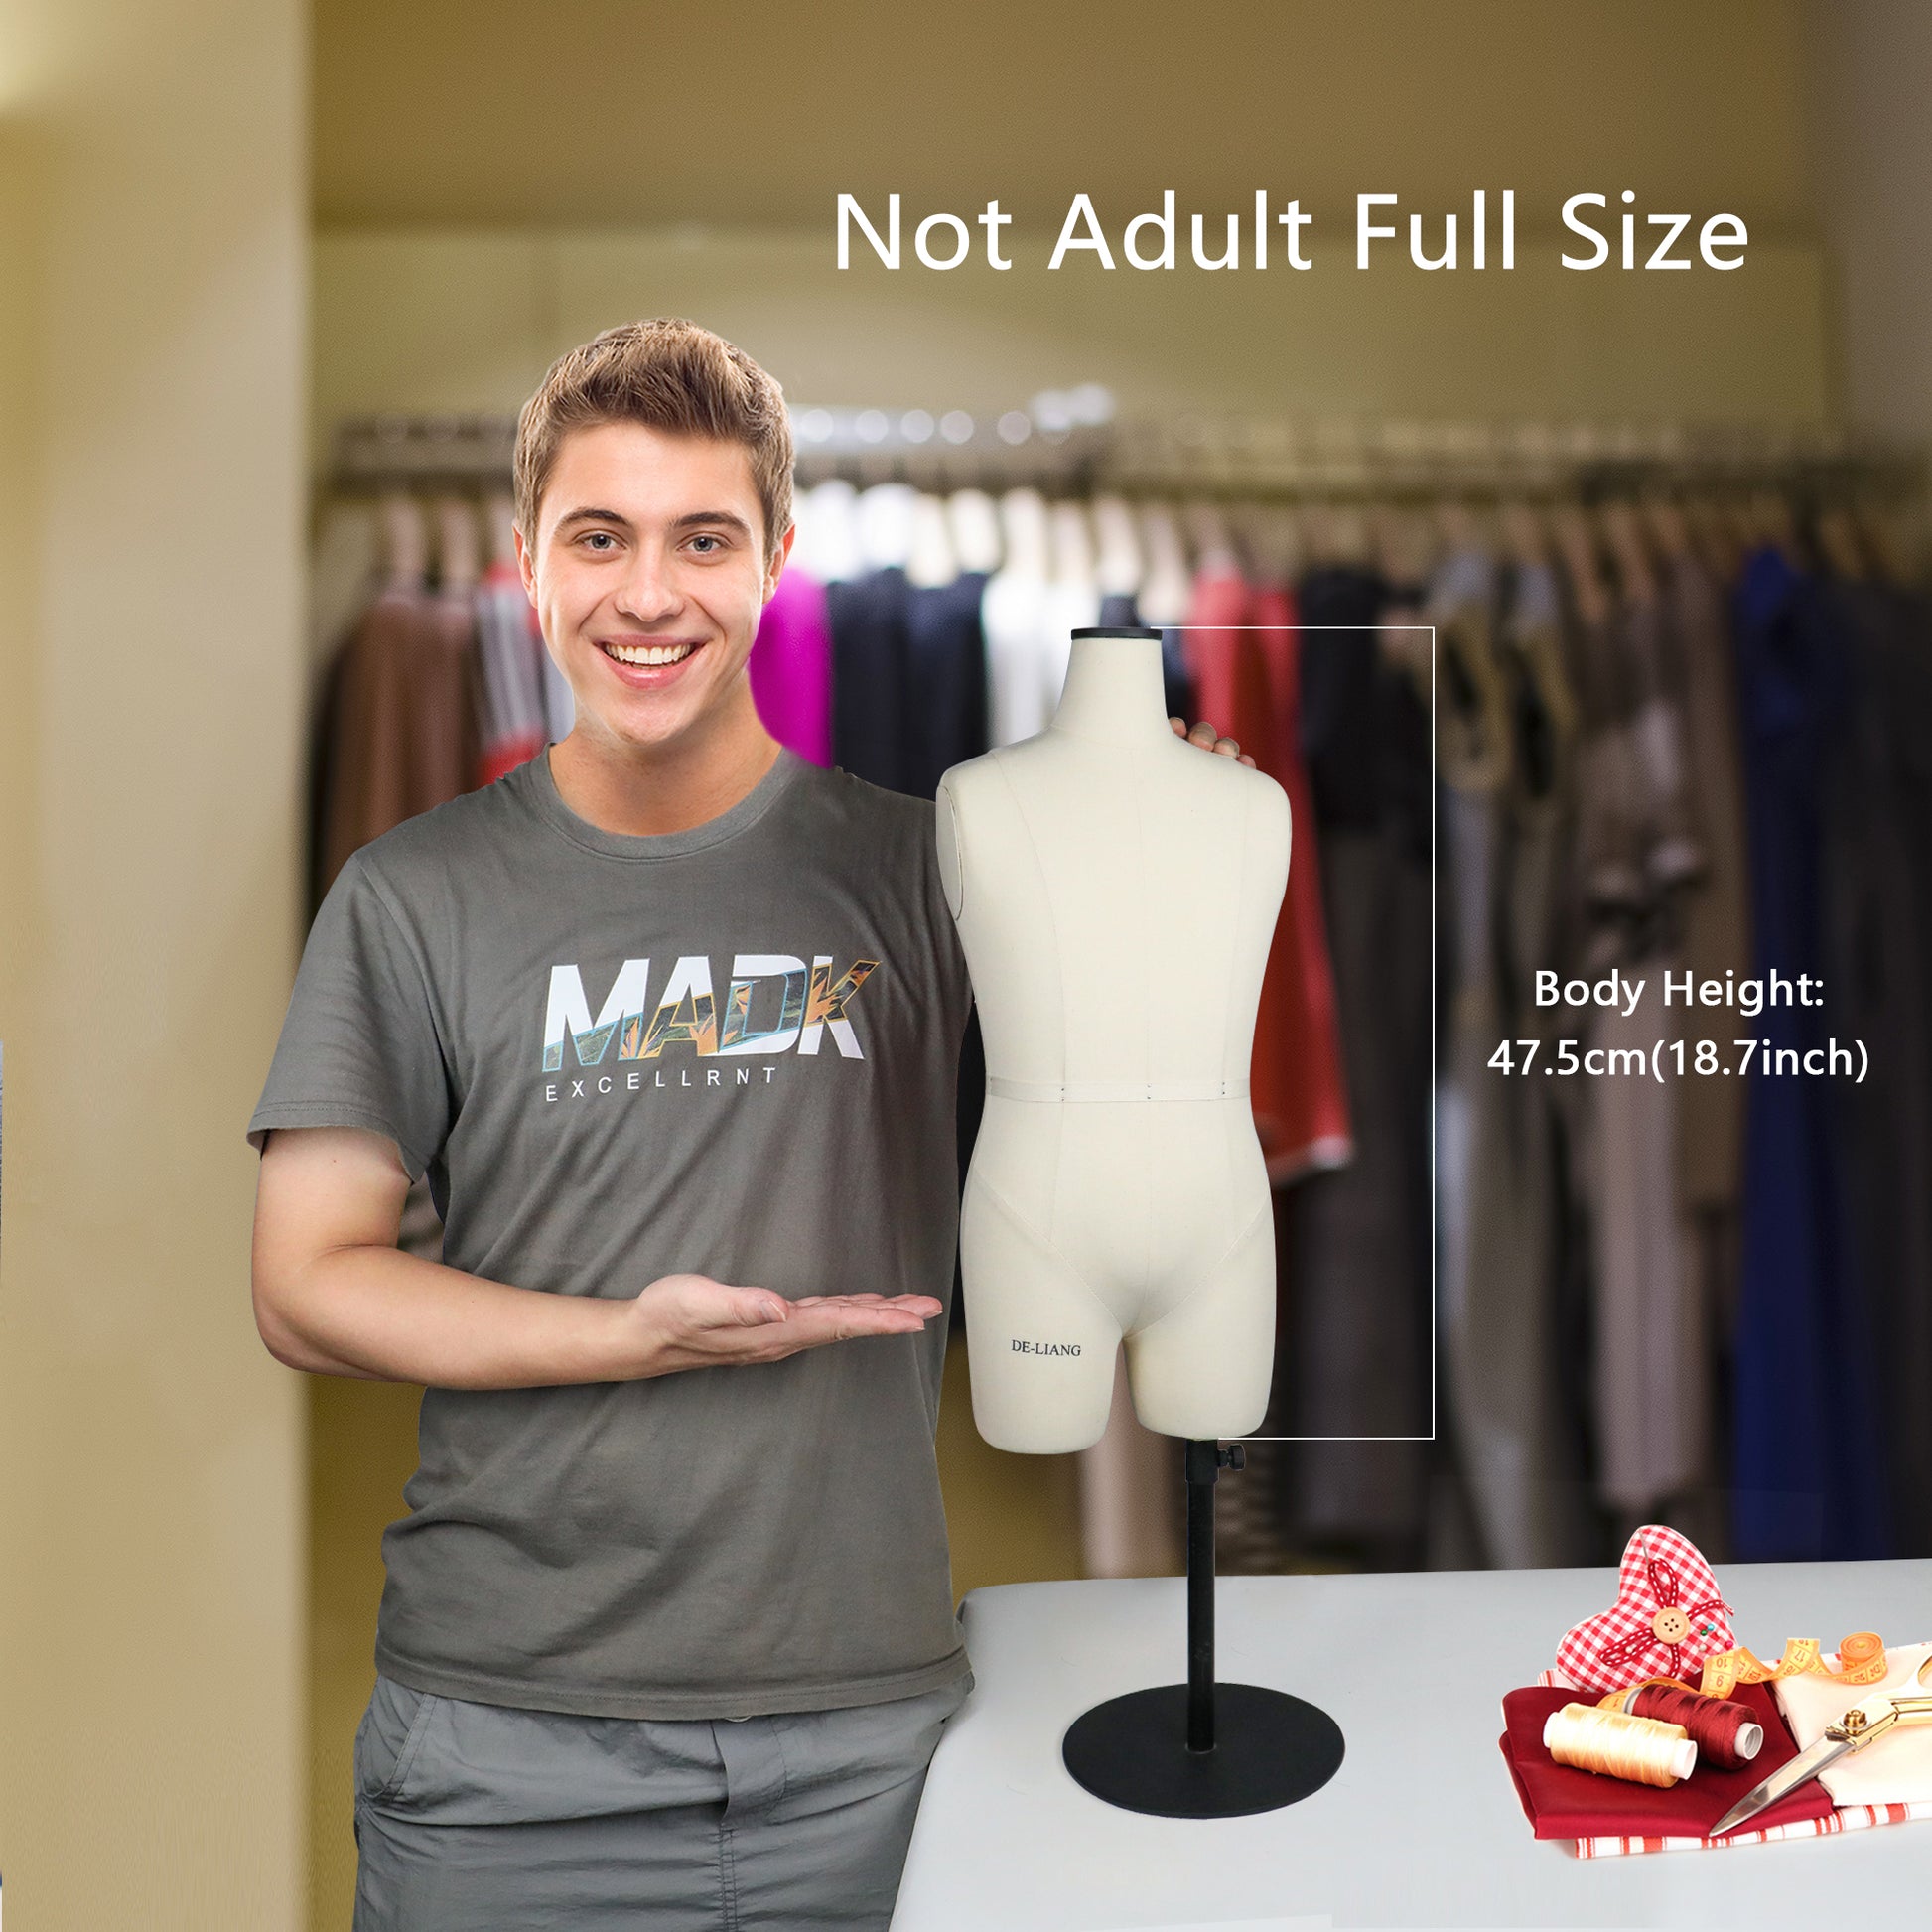 Clearance Sales Fully Pinnable Half Scale Dress Form,Mini Men Dressmaker Dummy for Sewing,1/2 Trouser Tailor Dummy, Half Size Scale Form DE-LIANG